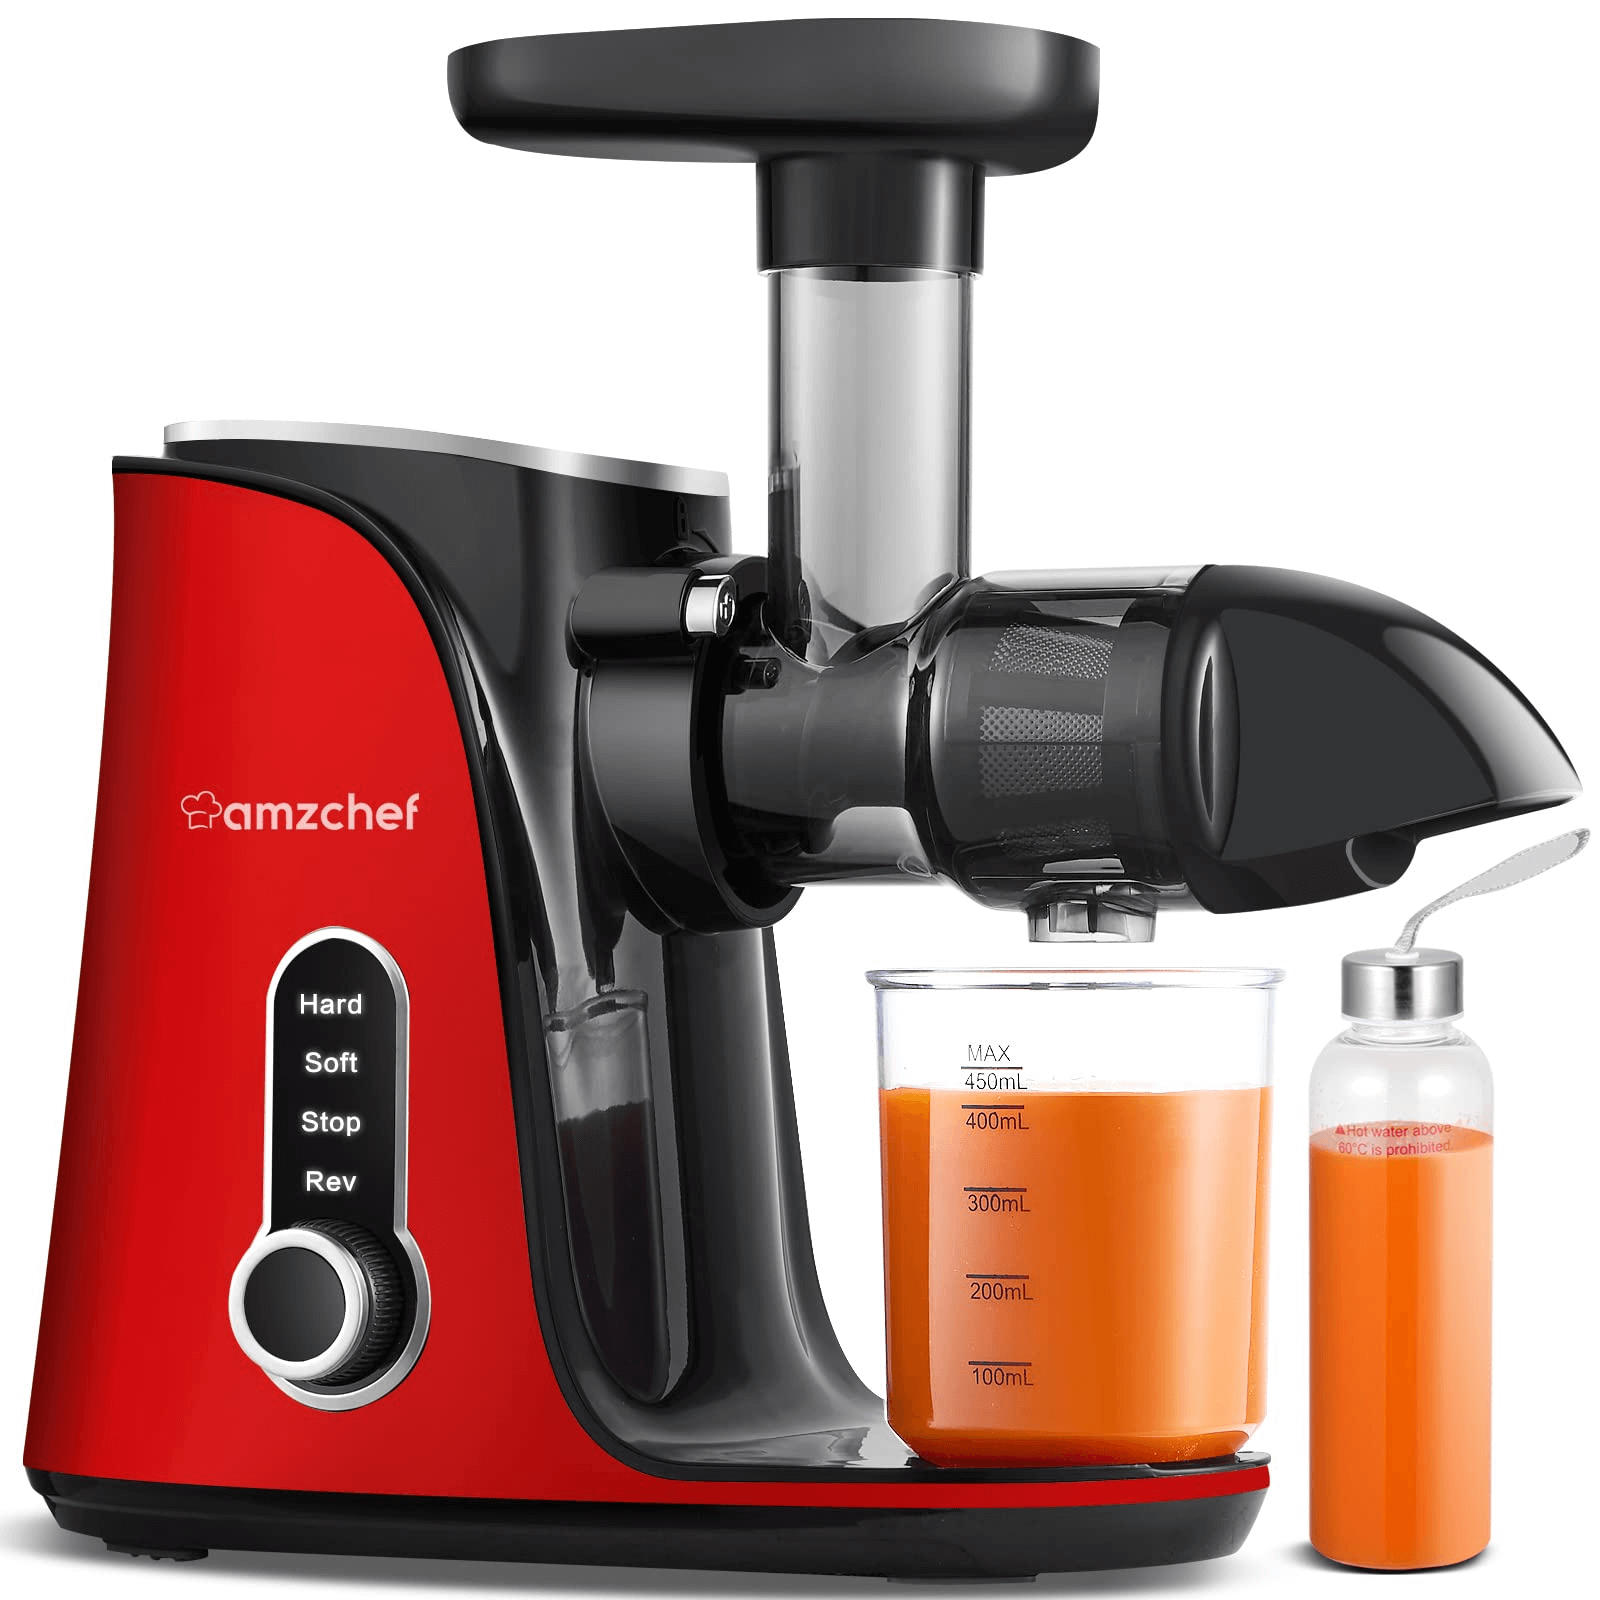 AMZCHEF Slow Juicer for Fruit and Vegetables Powerful Juicer GM3001 Red